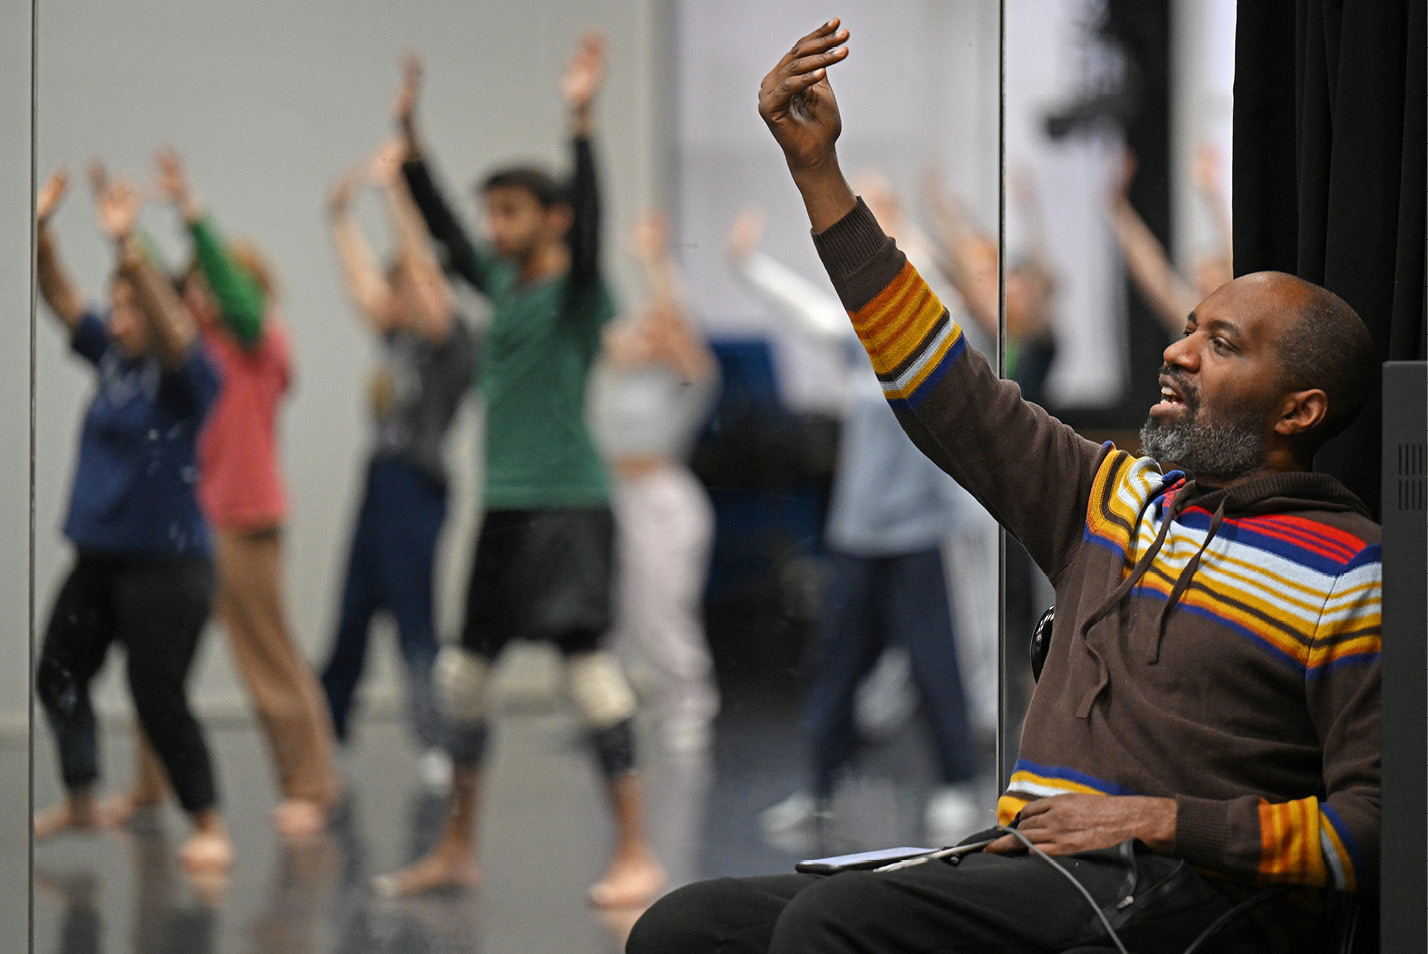 Choreographer Ronald K. Brown leads a master class for dance students